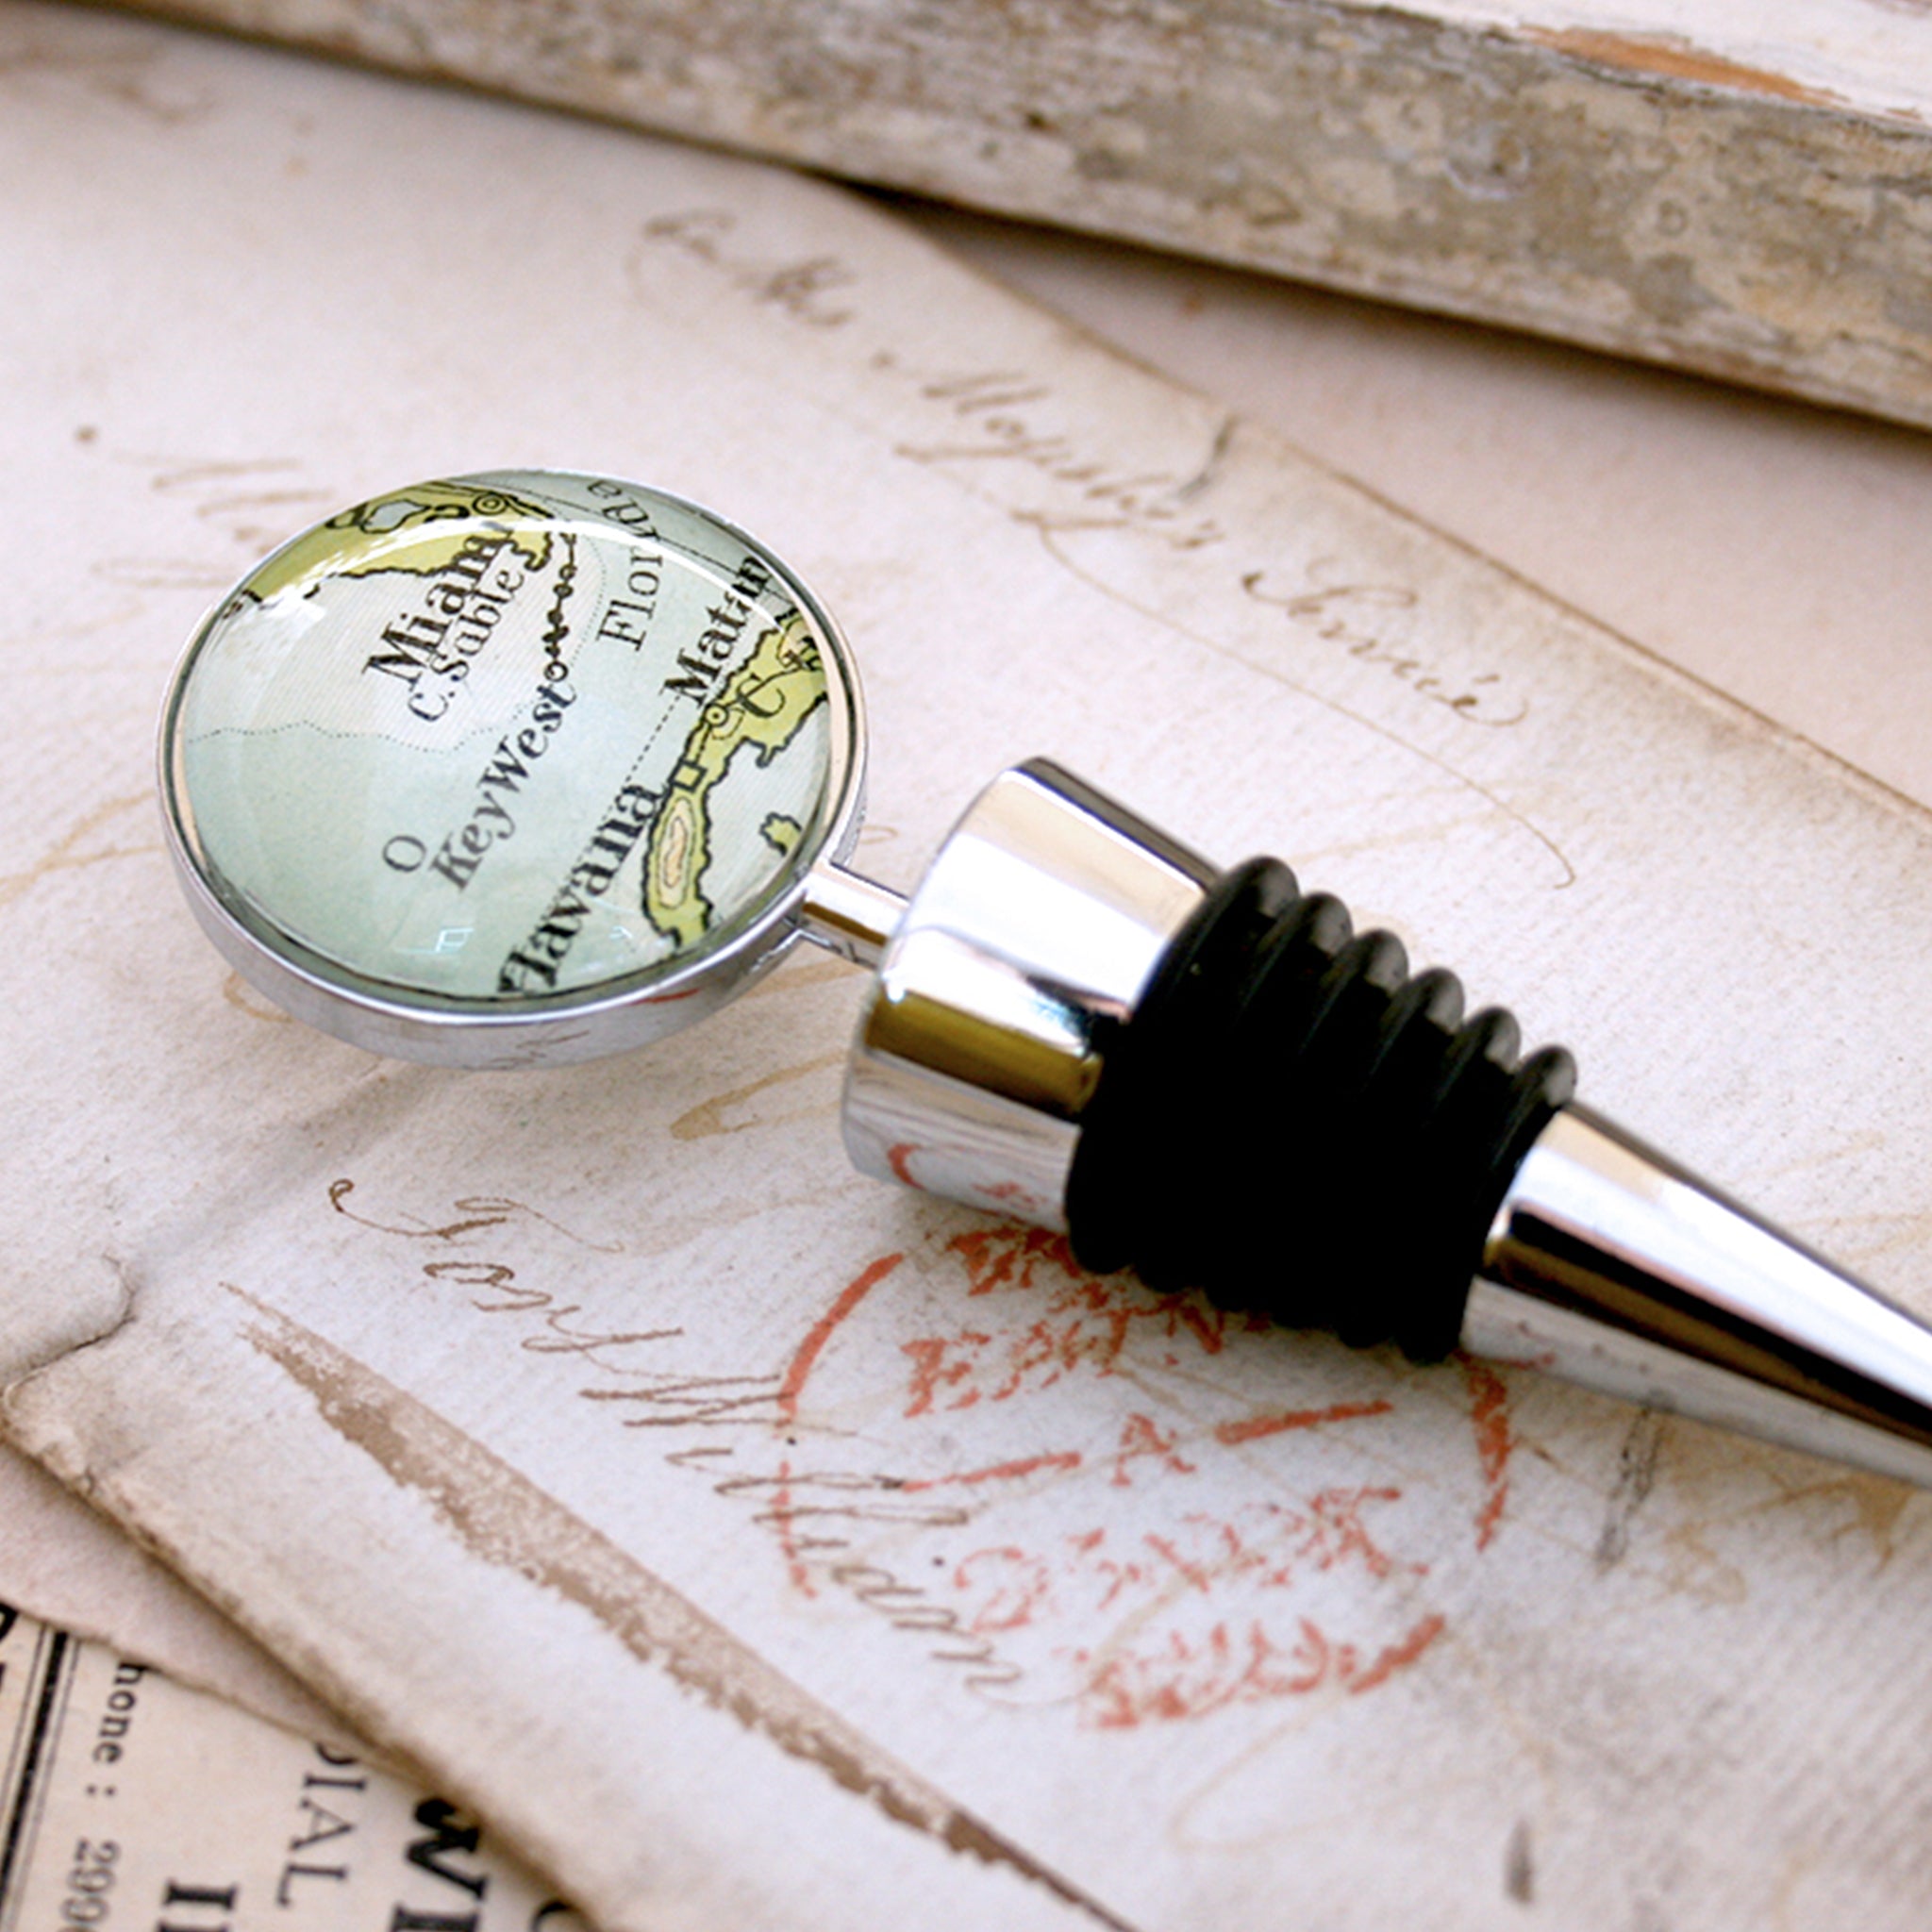 Wine Bottle Stopper personalised with map of Miami